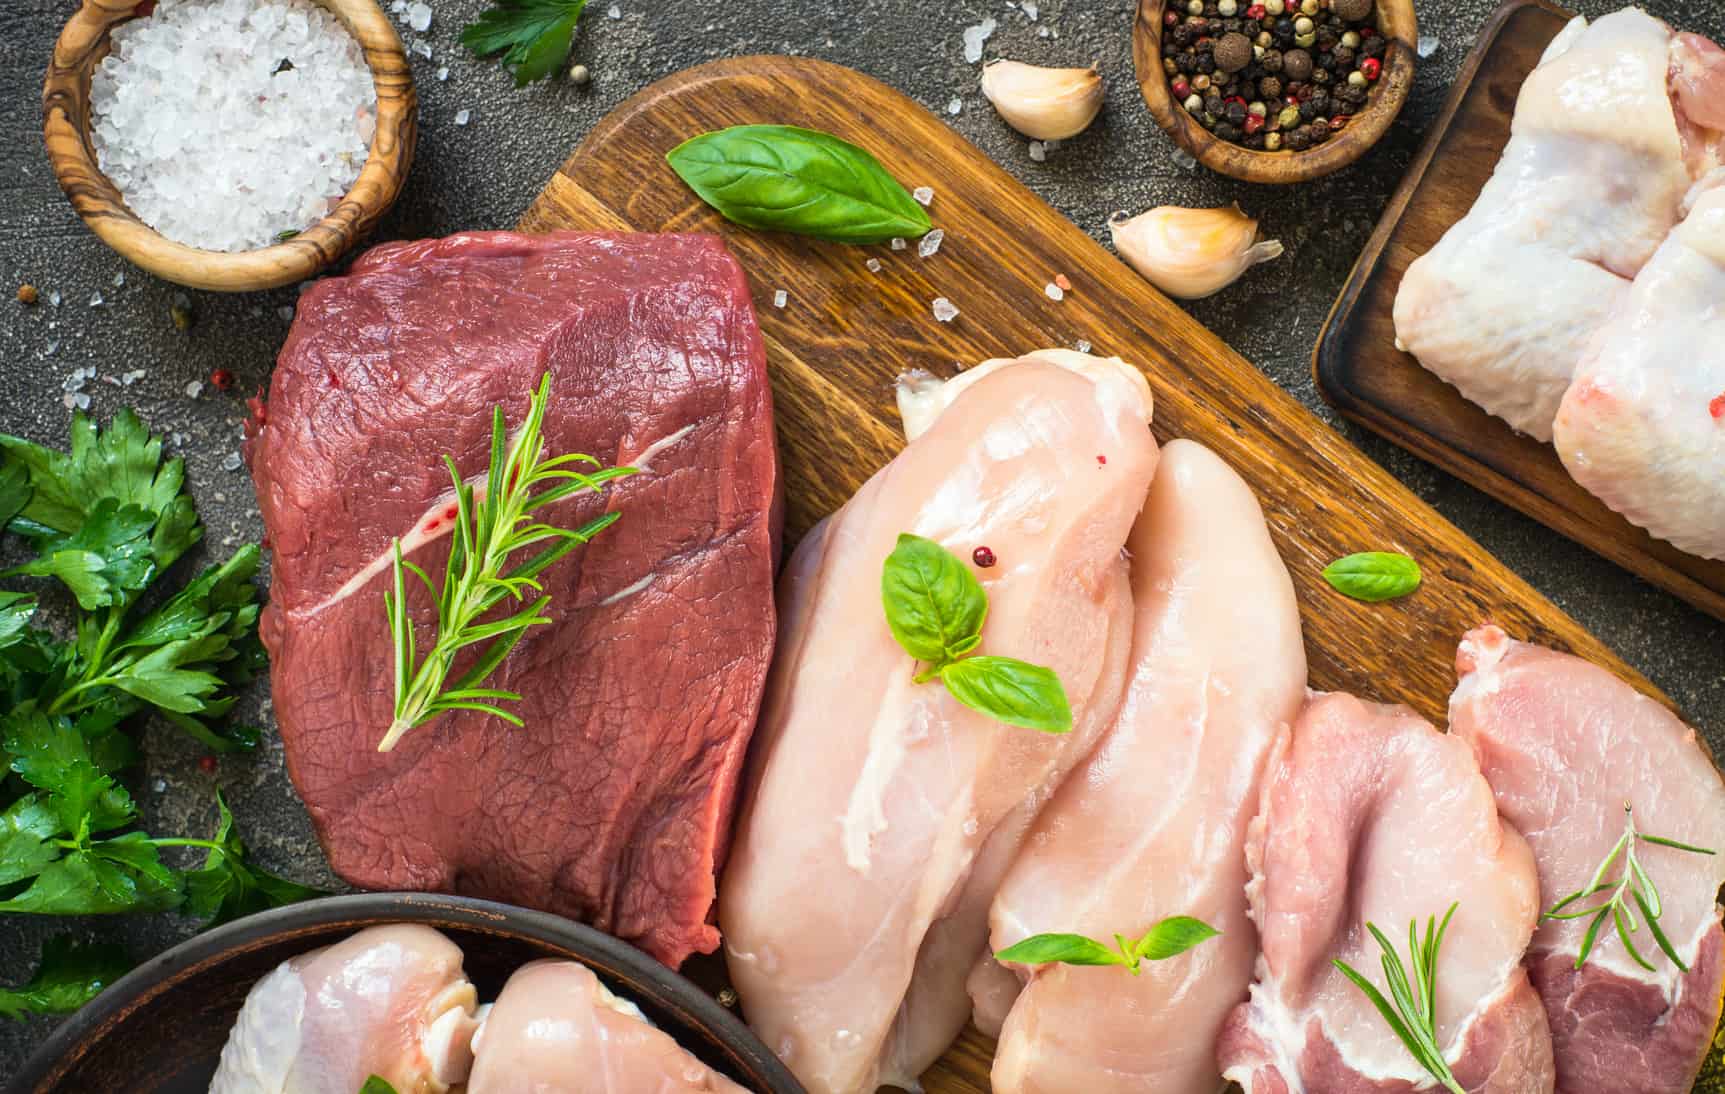 10 Things to Look Out for When Buying Meat (And How to Buy the